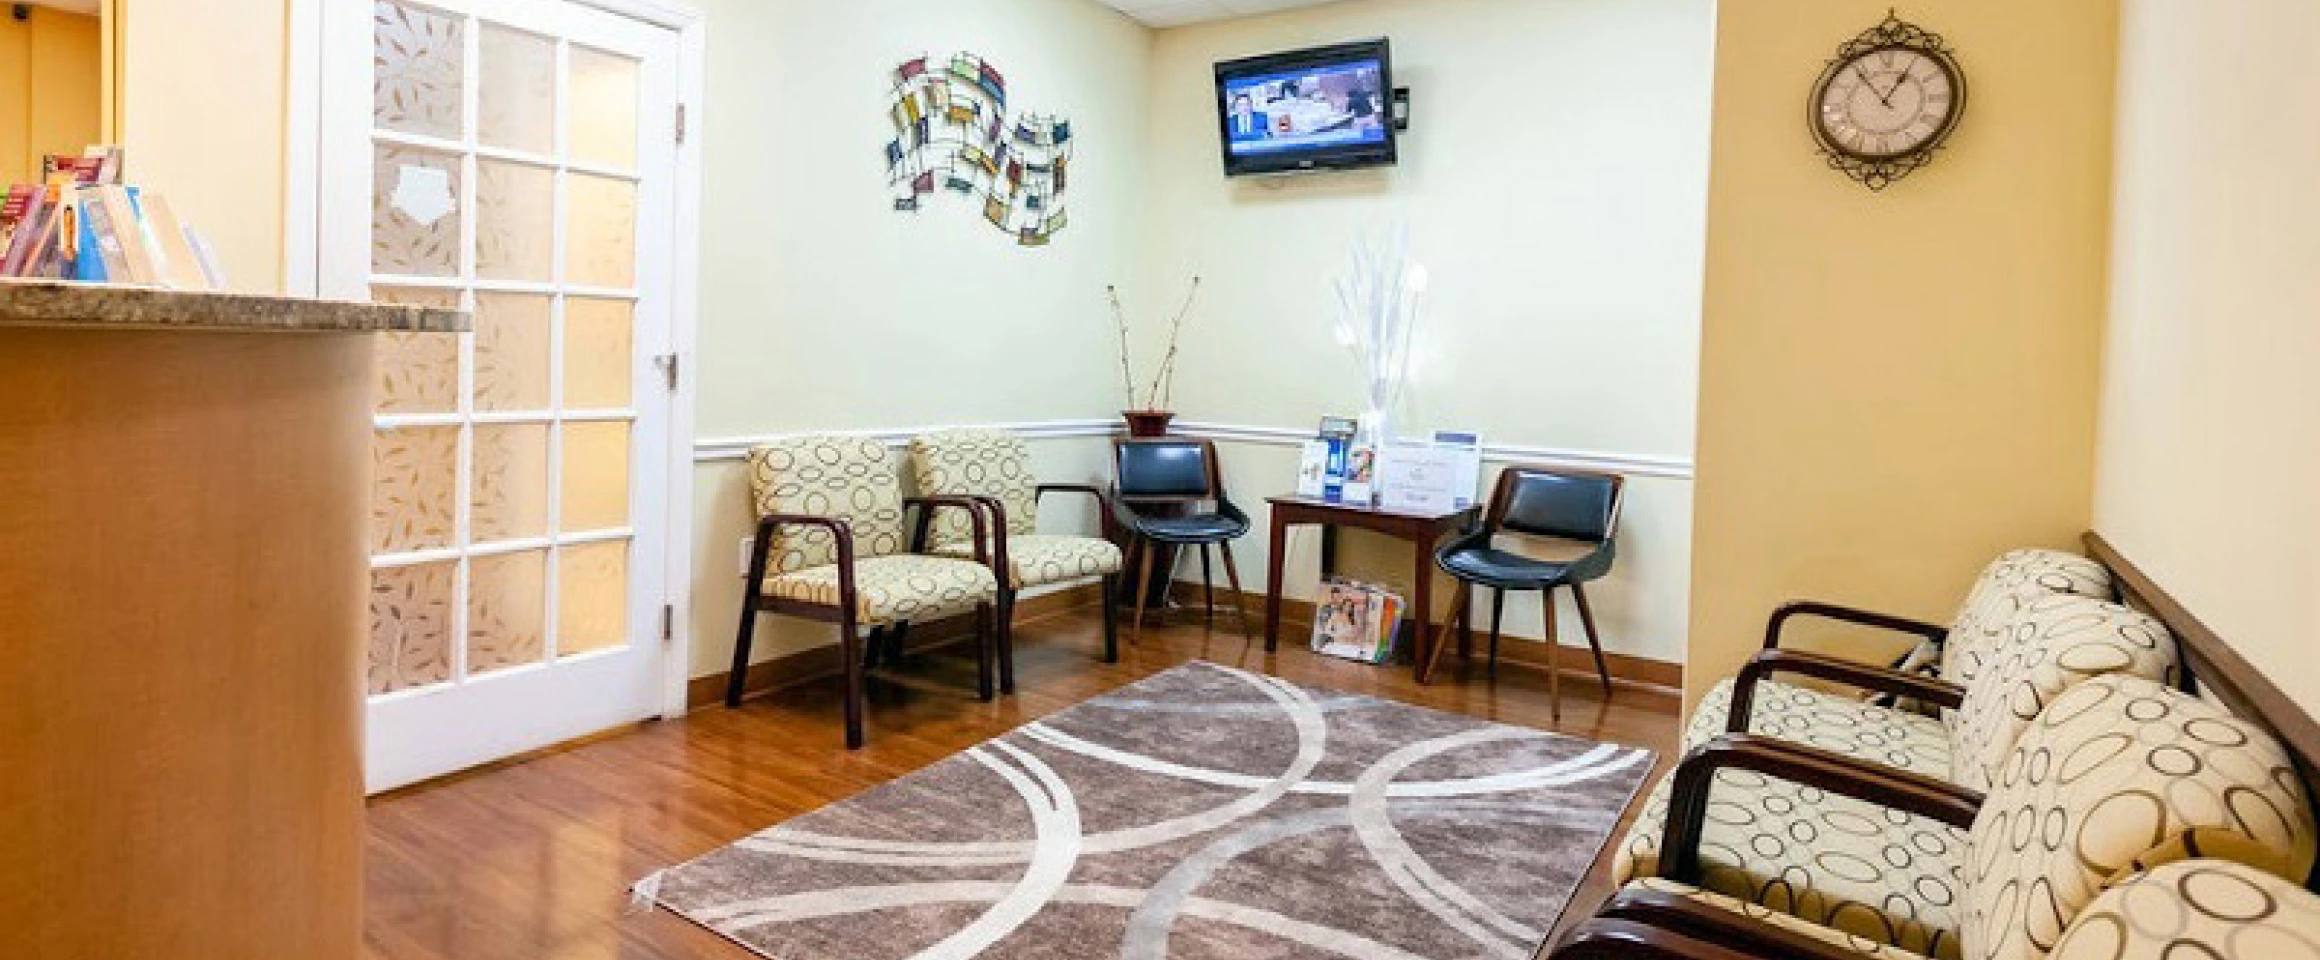 Comfortable Dentistry Experience at Smile Saver Dental